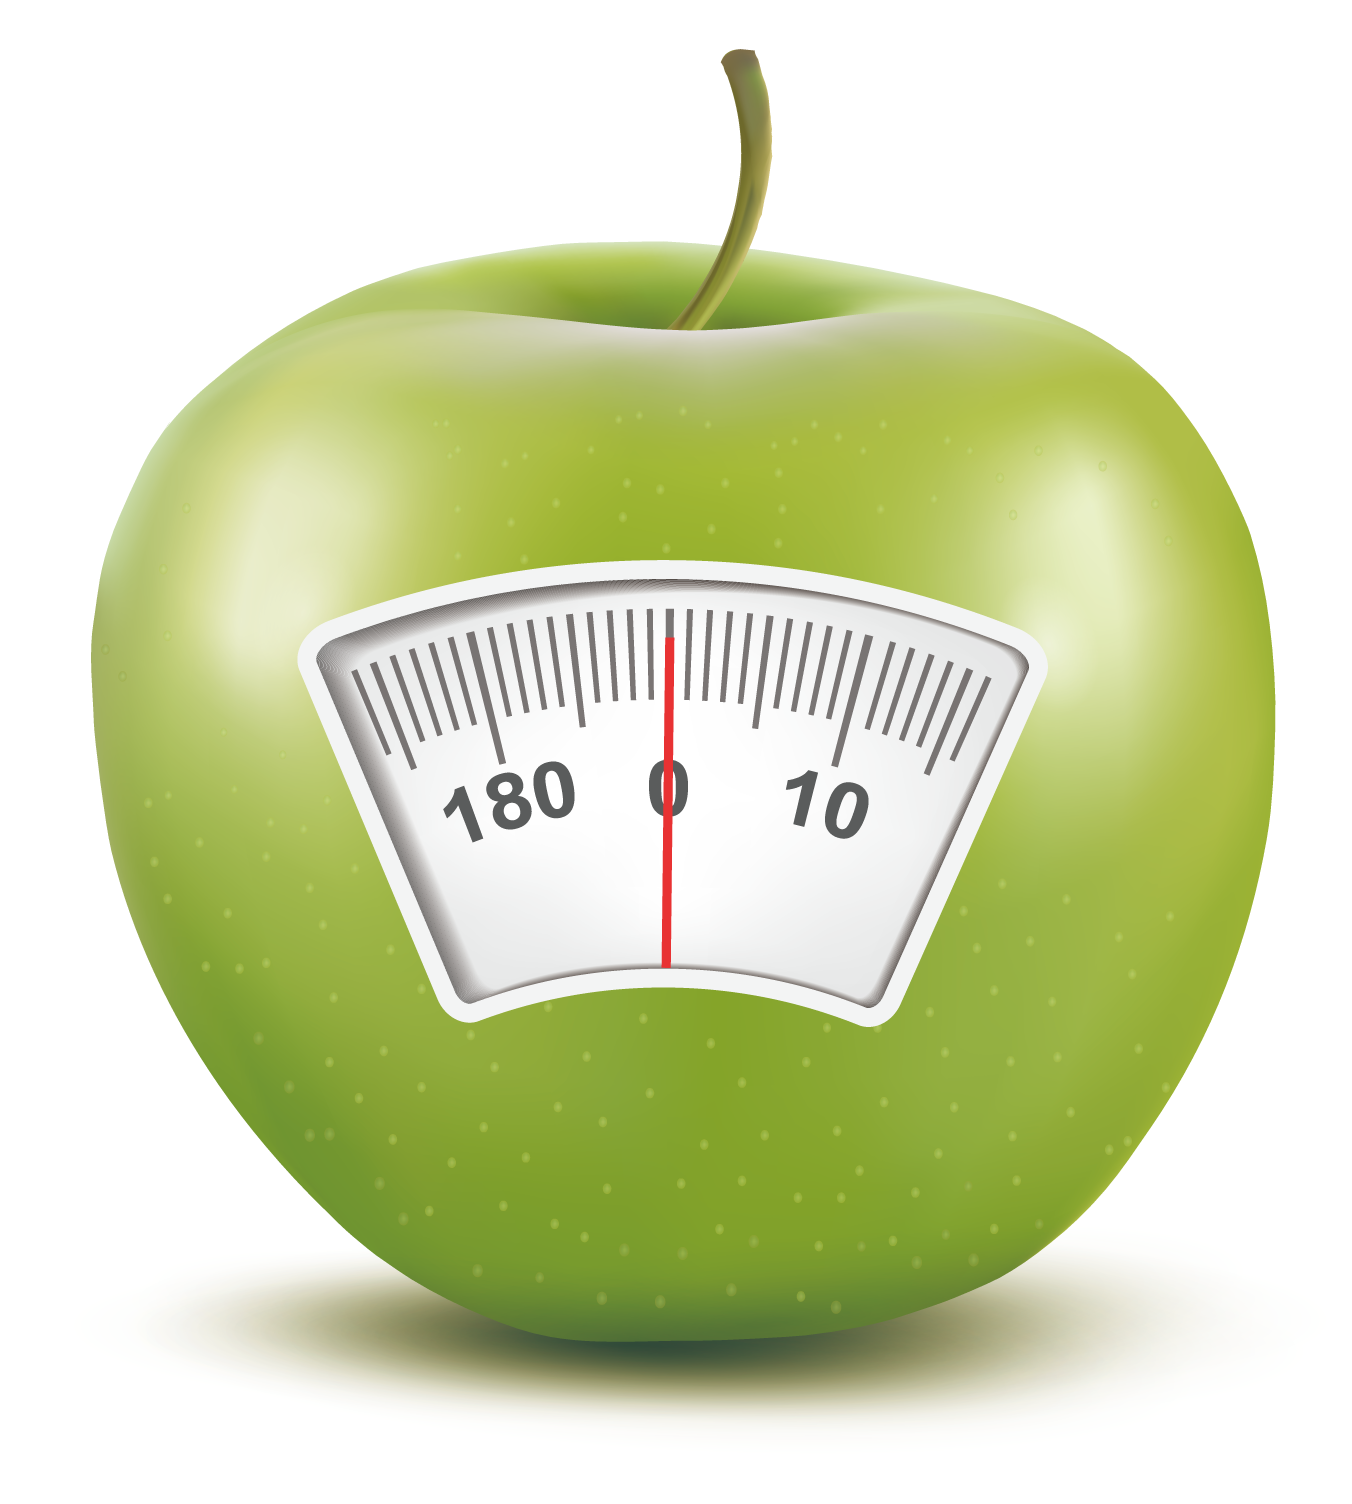 Weighing scale Apple Scale ruler - Apple creative 1352*1504 ...